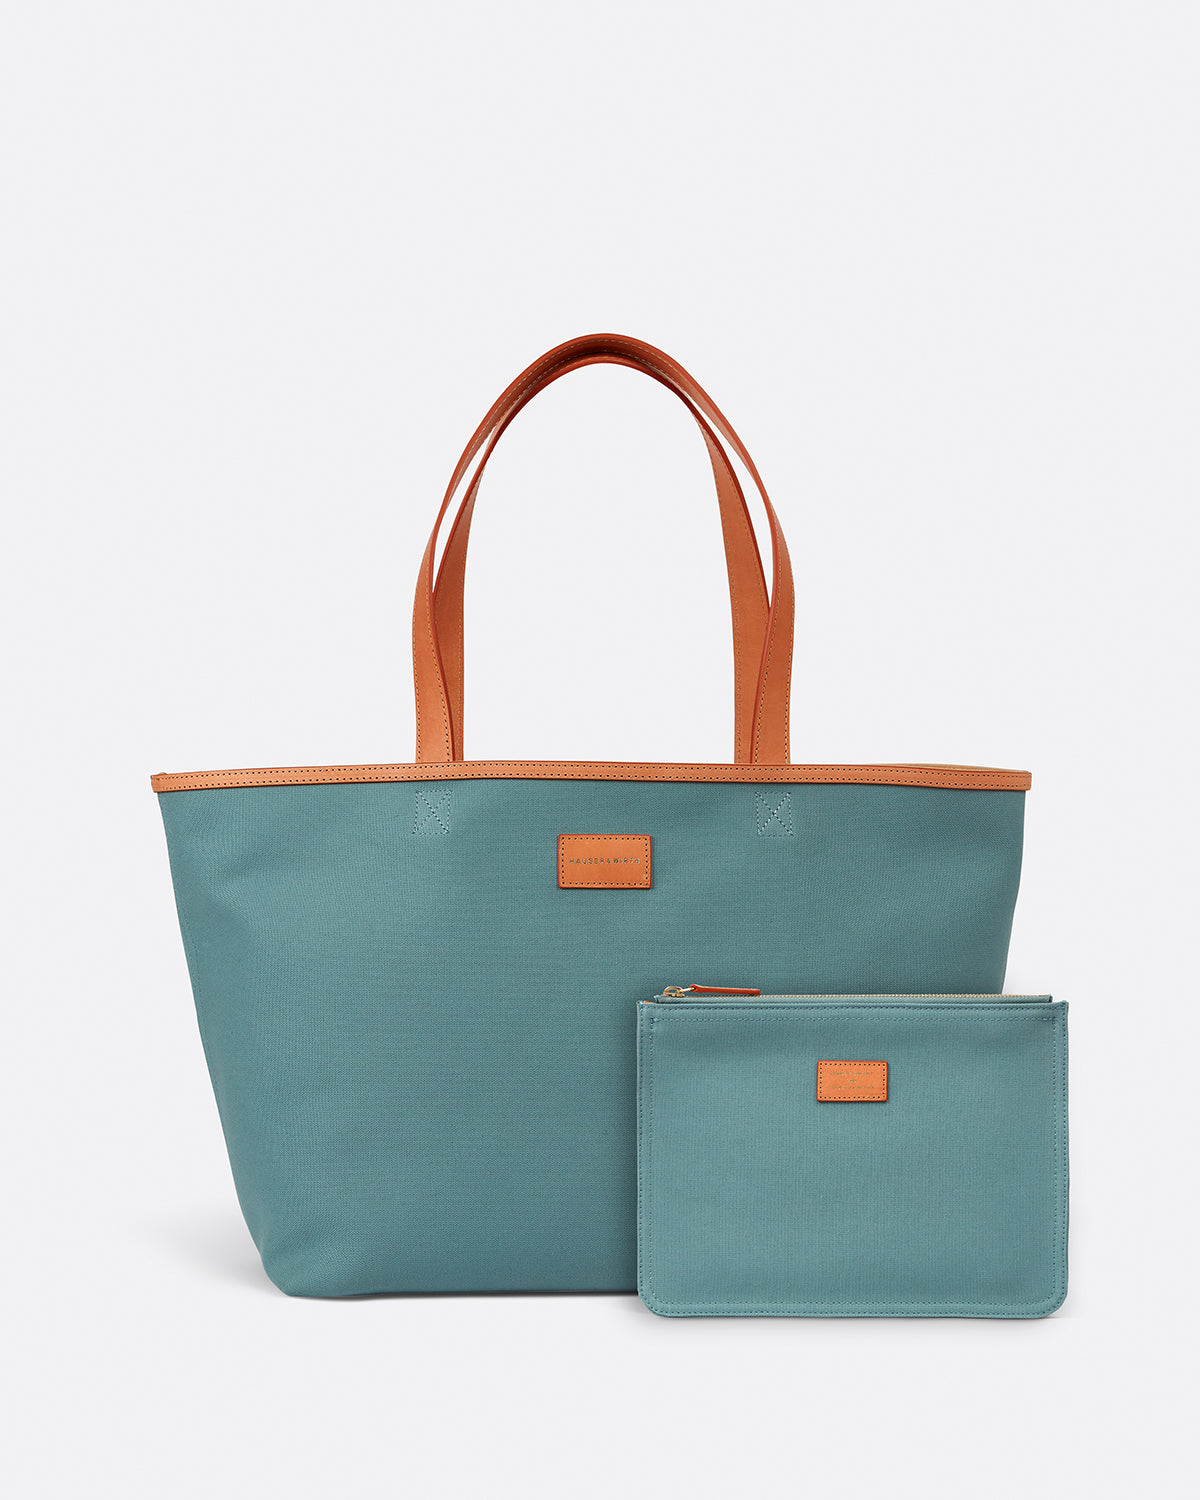 Mansur Gavriel Is Teaming Up With the Calder Foundation to Release